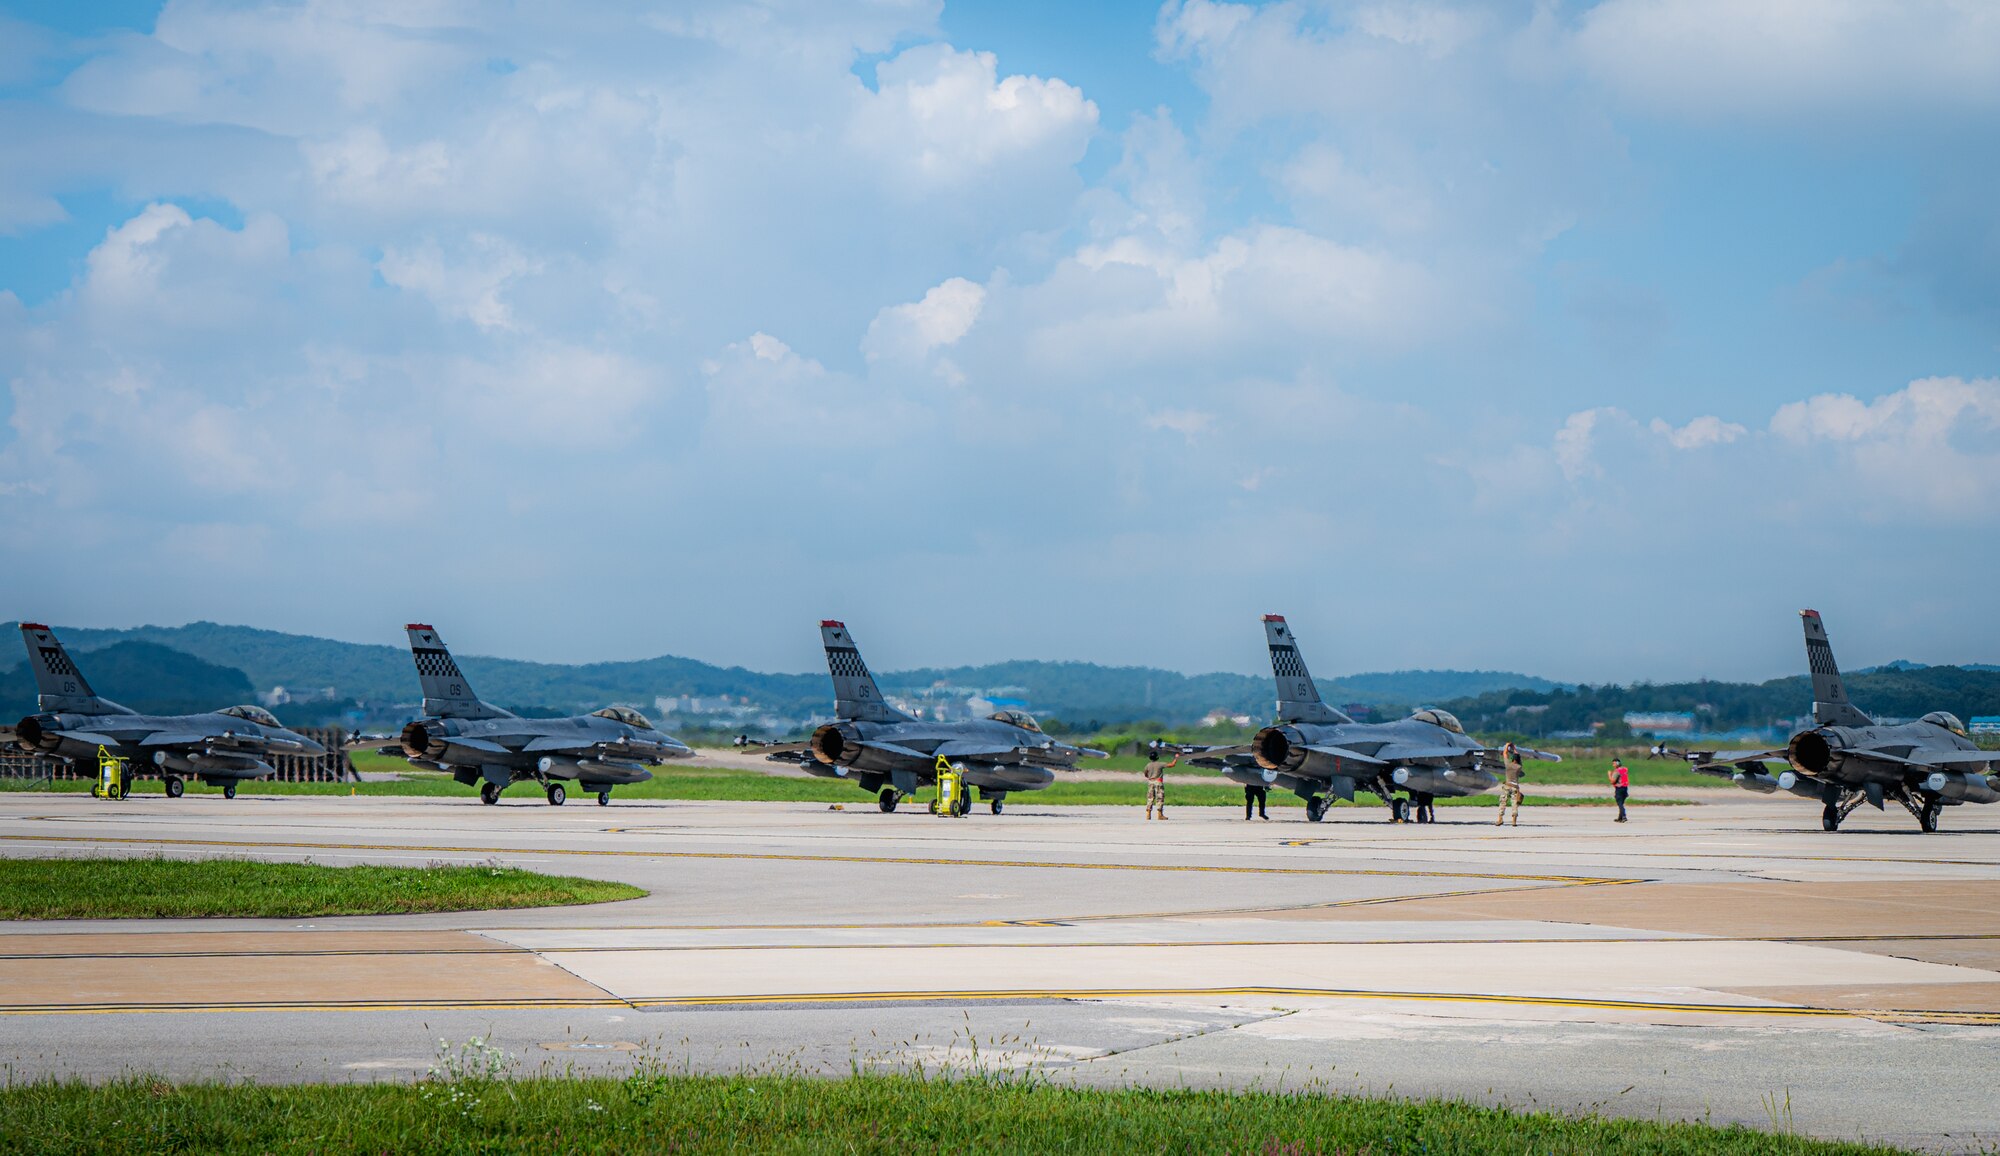 Photo of aircraft lined up on a flightline